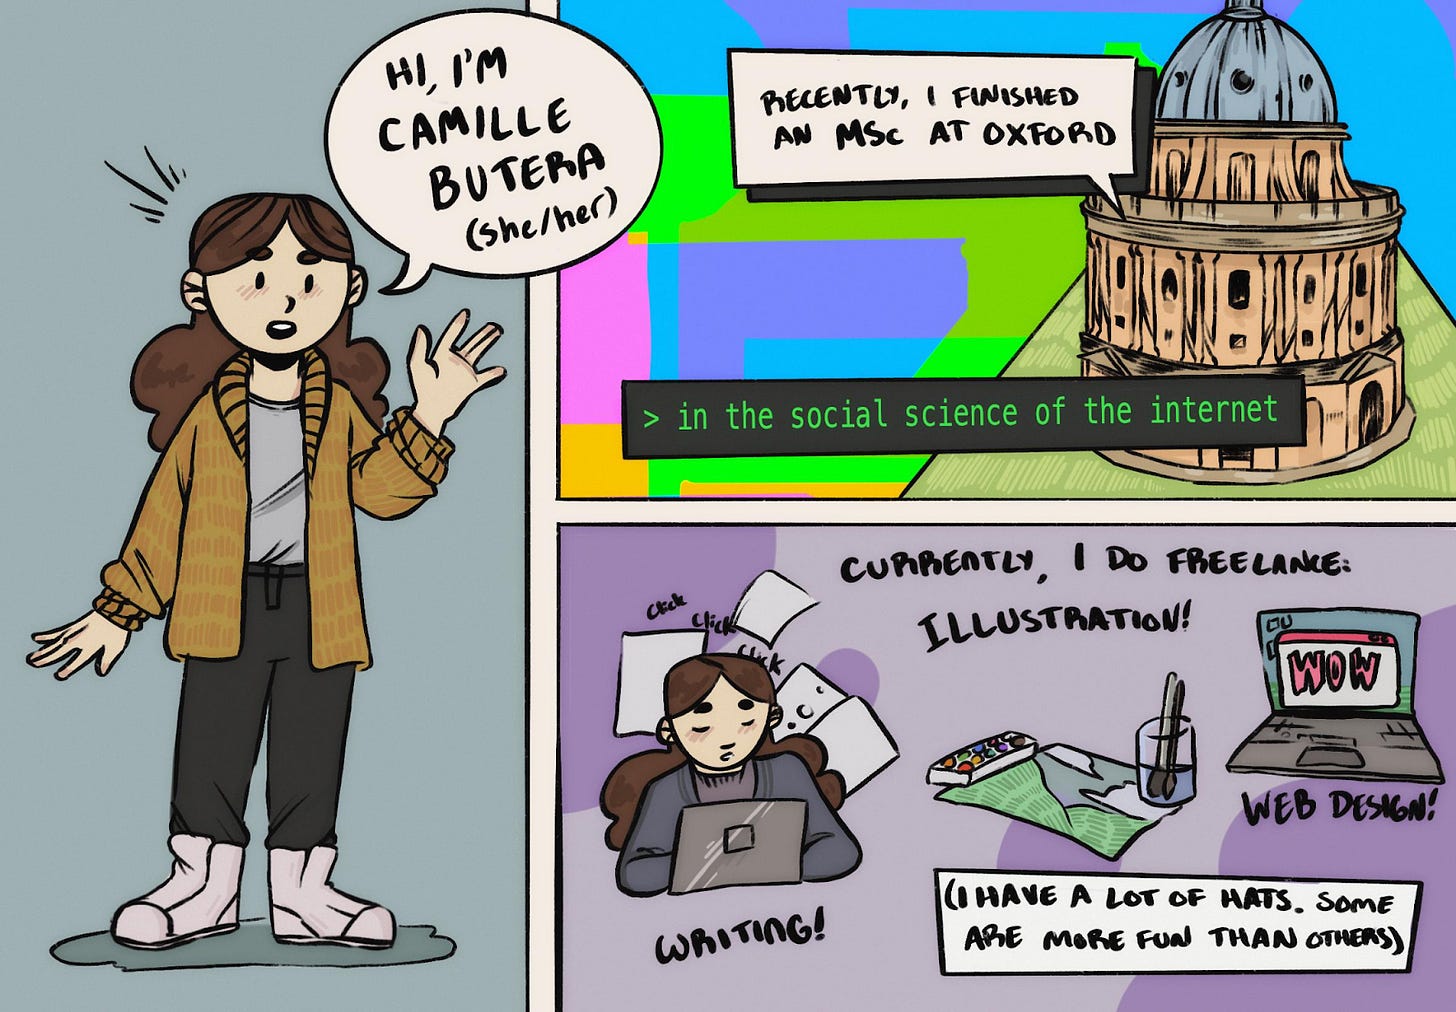 Three cartoon panels, Left: a self-portrait of cartoon me saying “Hi, I'm Camille Butera (she/her).” Upper right: An illustration of Radcliffe Camera with the text “Recently I finished an MSc at Oxford, in the Social Science of the Internet.” Lower right: me working hard at my laptop: “currently I do freelance illustration! Writing! Web design! (I have a lot of hats. Some are more fun than others).”